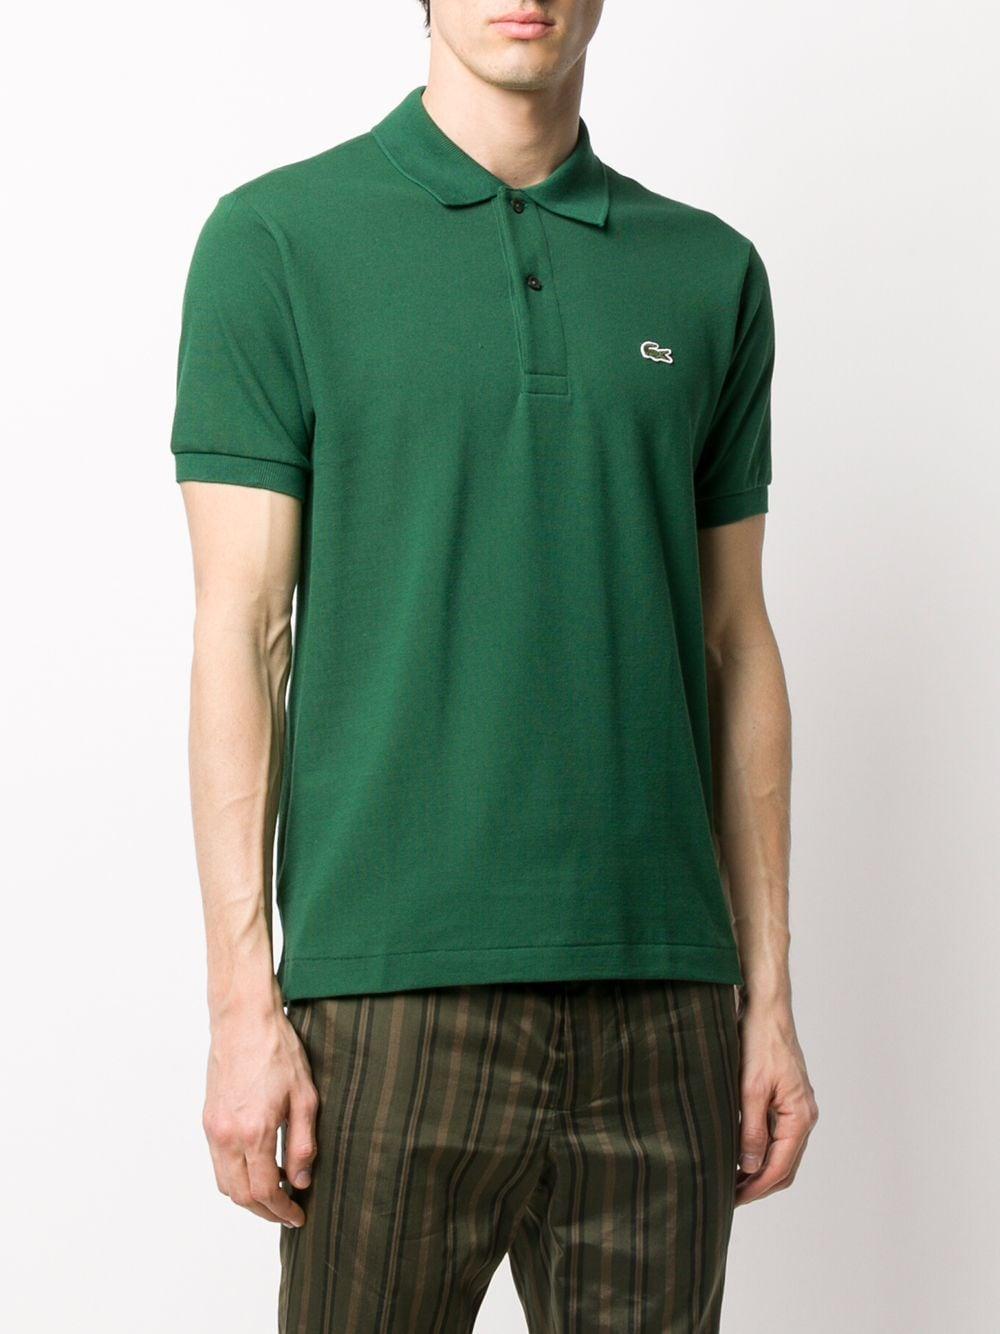 Lacoste Cotton Logo Patch Polo Shirt in Green for Men - Lyst